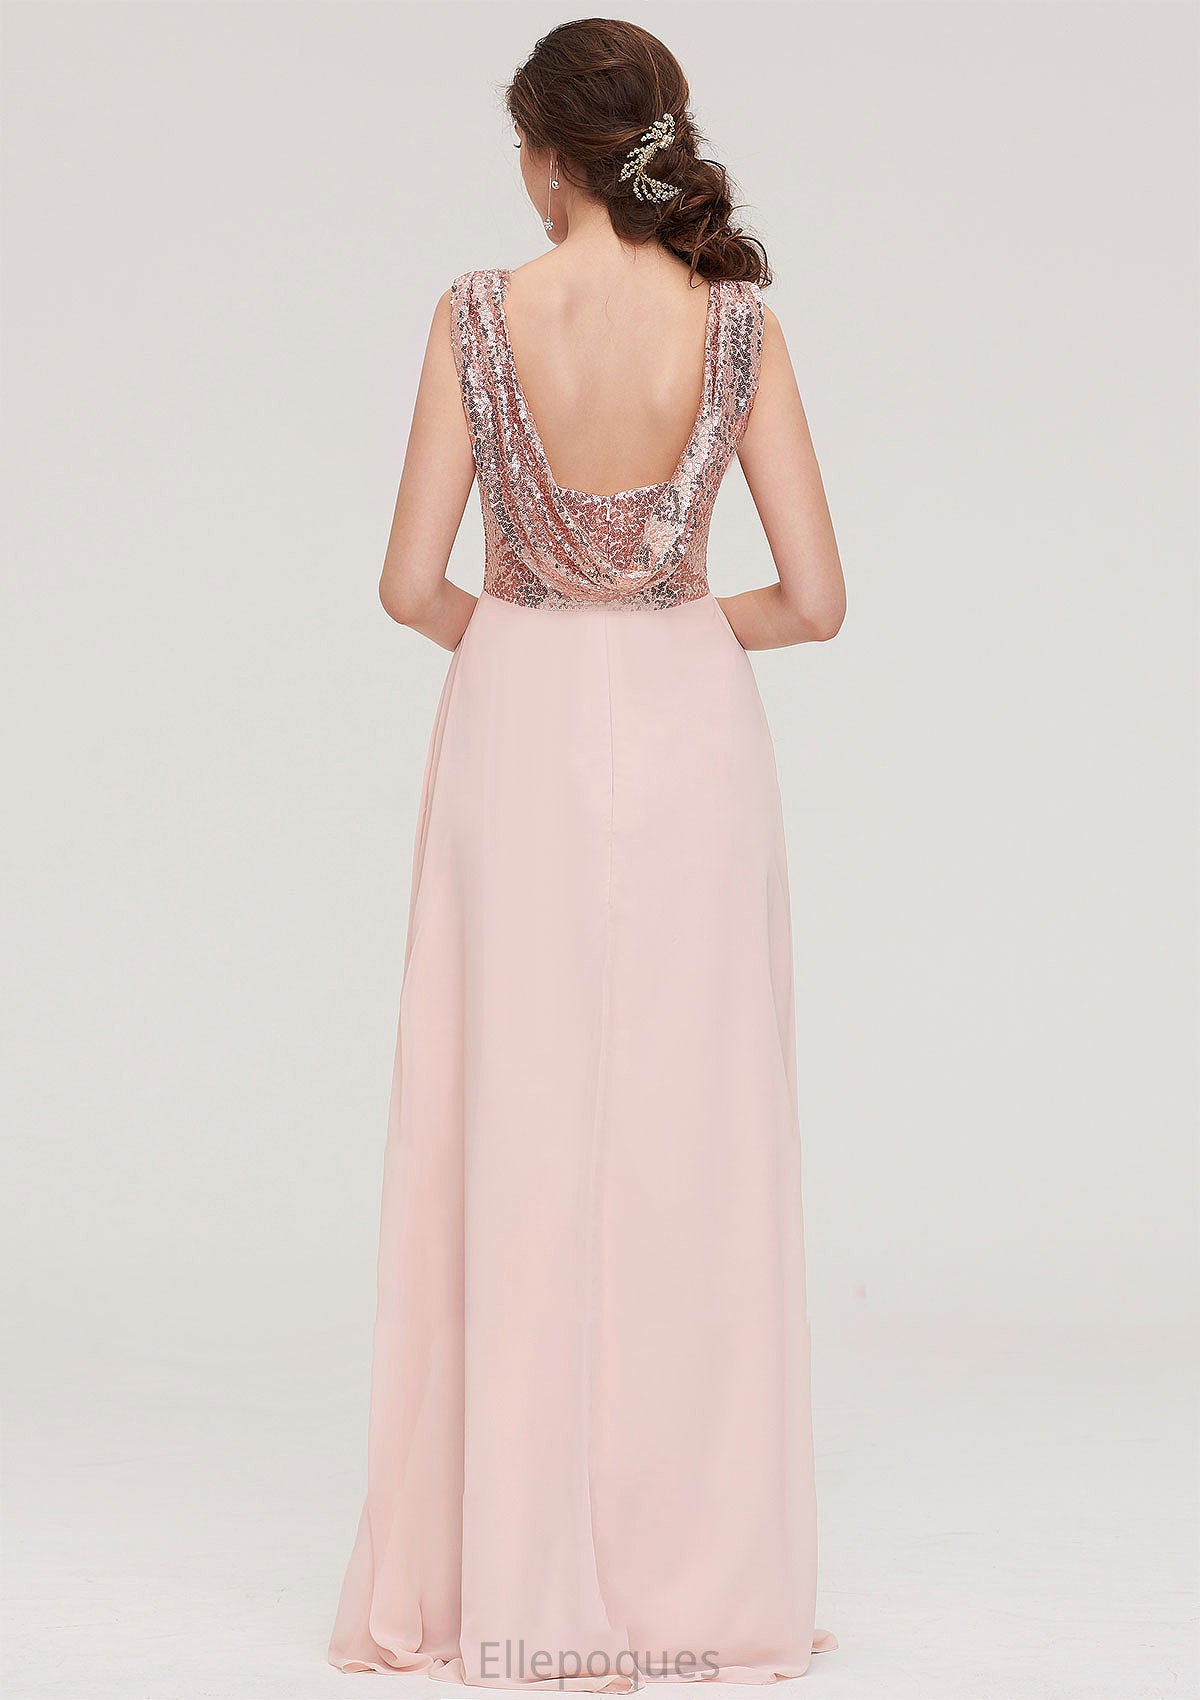 Sleeveless Long/Floor-Length Sweetheart A-line/Princess Chiffon Bridesmaid Dresses With Pleated Sequins Rylie HOP0025494